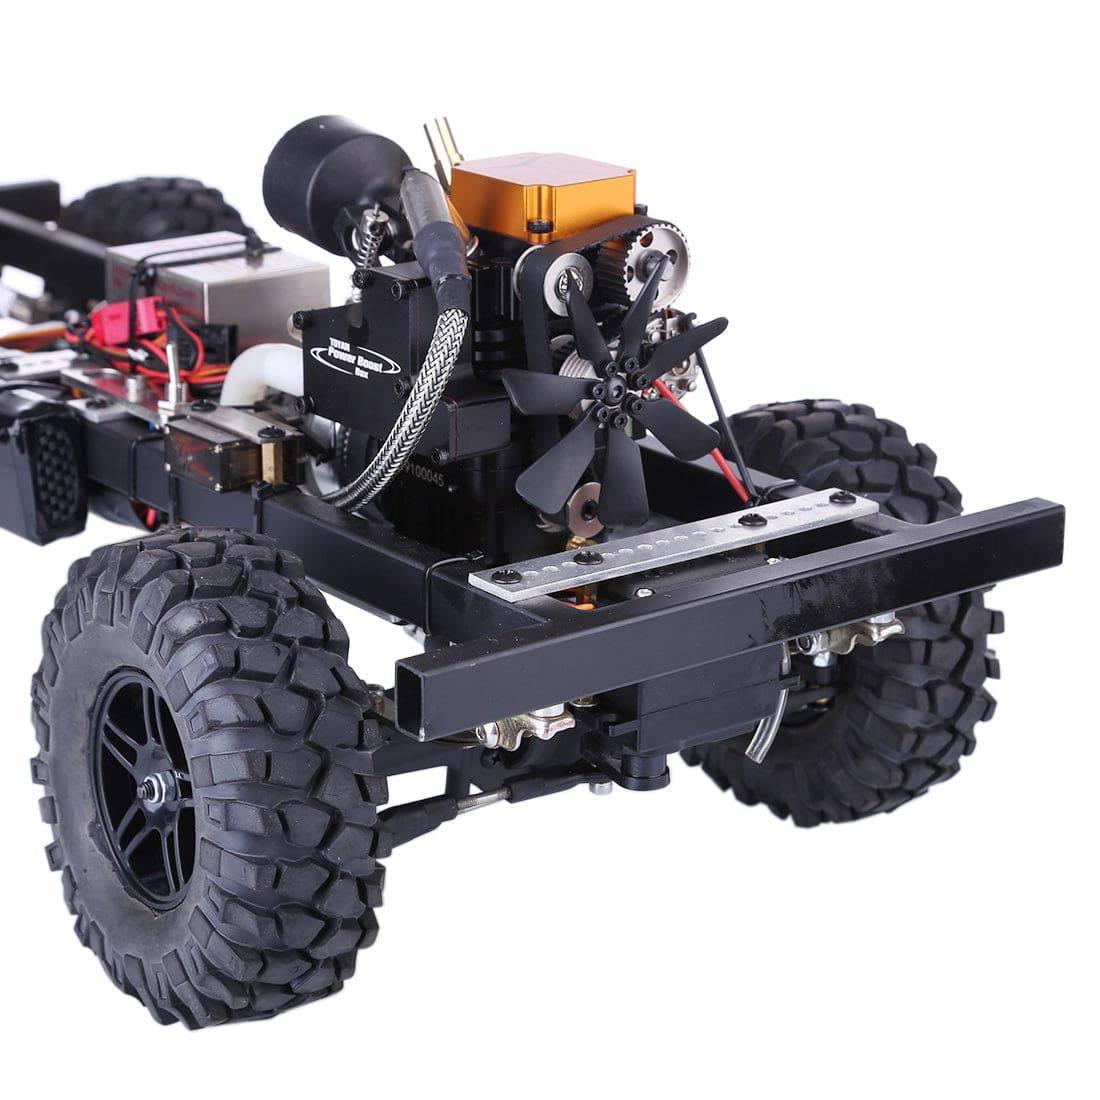 Gas Powered Rc Cars For Sale Near Me: Important Considerations for Buying a Gas-Powered RC Car Near You